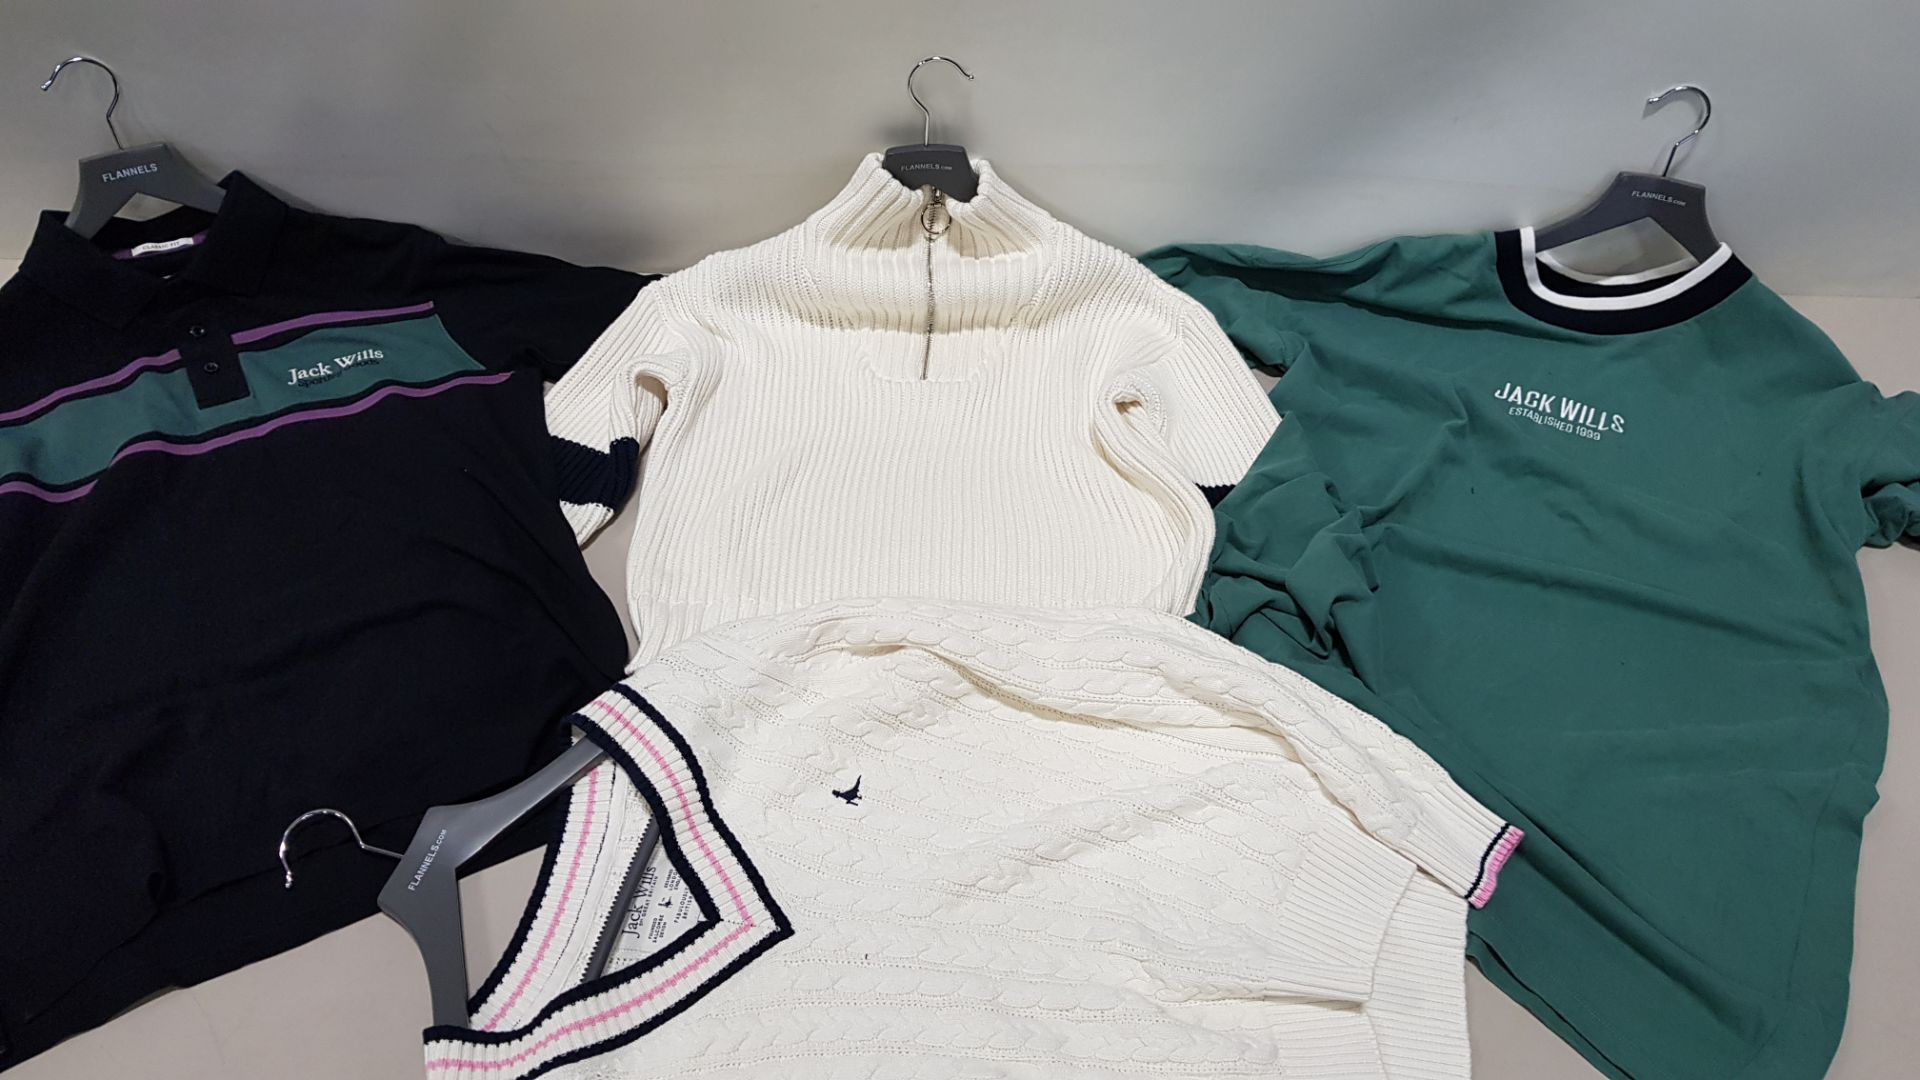 10 PIECE MIXED JACK WILLS CLOTHING LOT IN VARIOUS SIZES CONTAINING JACK WILLS KNITTED JUMPER, JACK